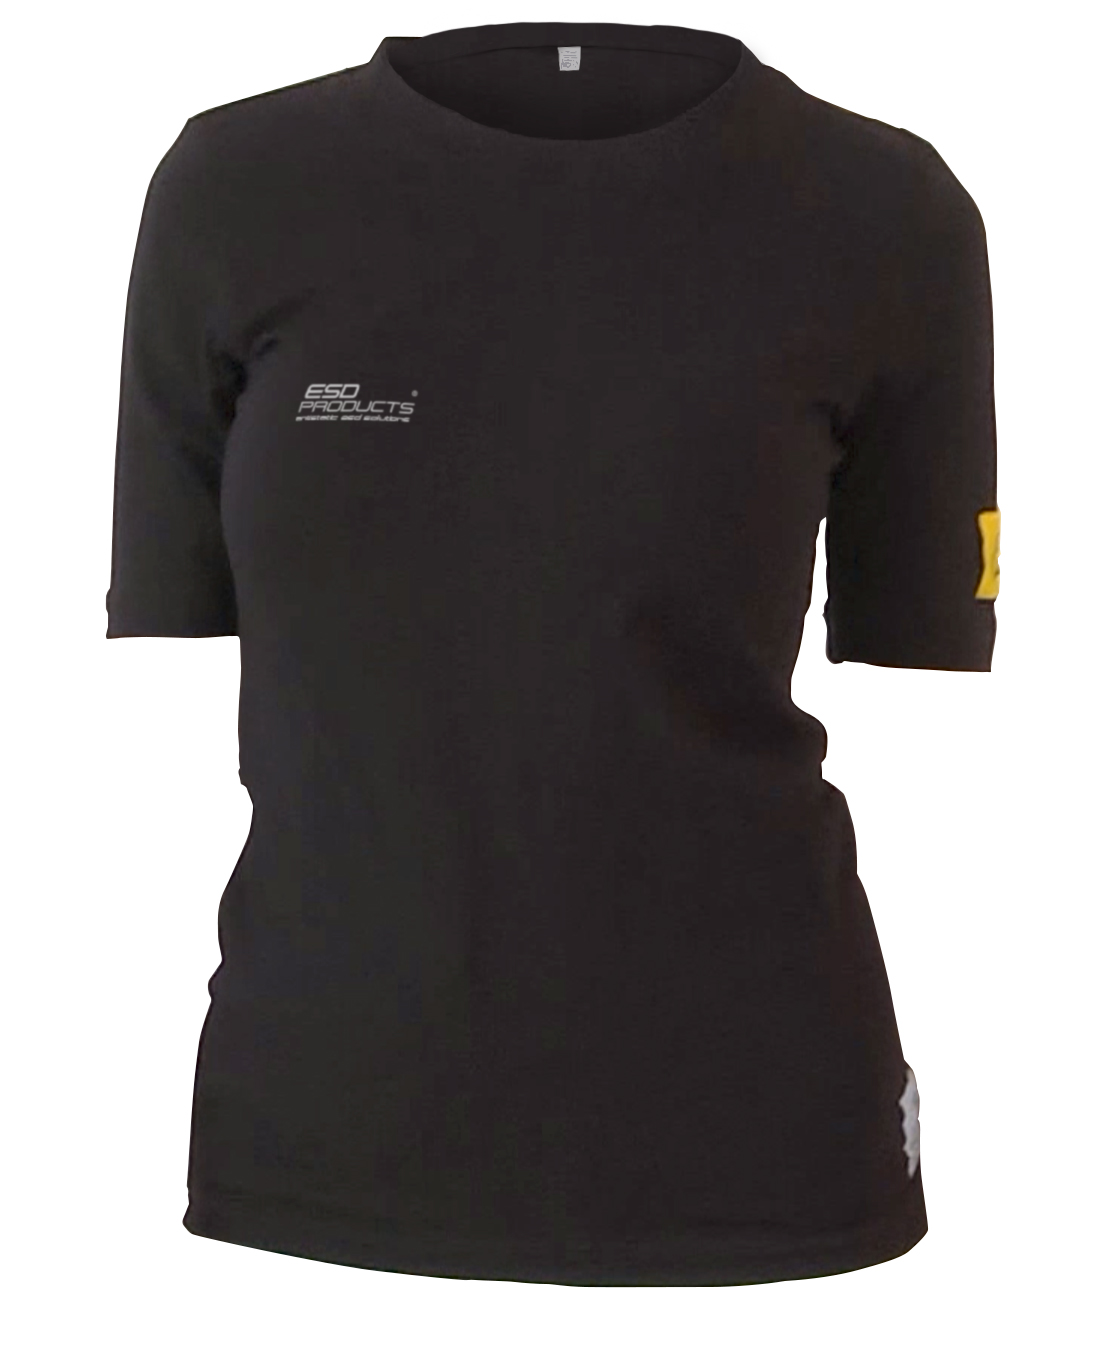 ESD Stretch T-Shirt Woman ATLY Short Sleeve Round Neck ALY20 Fabric Black Unisex 4XL - 473.ATLY-ALY2